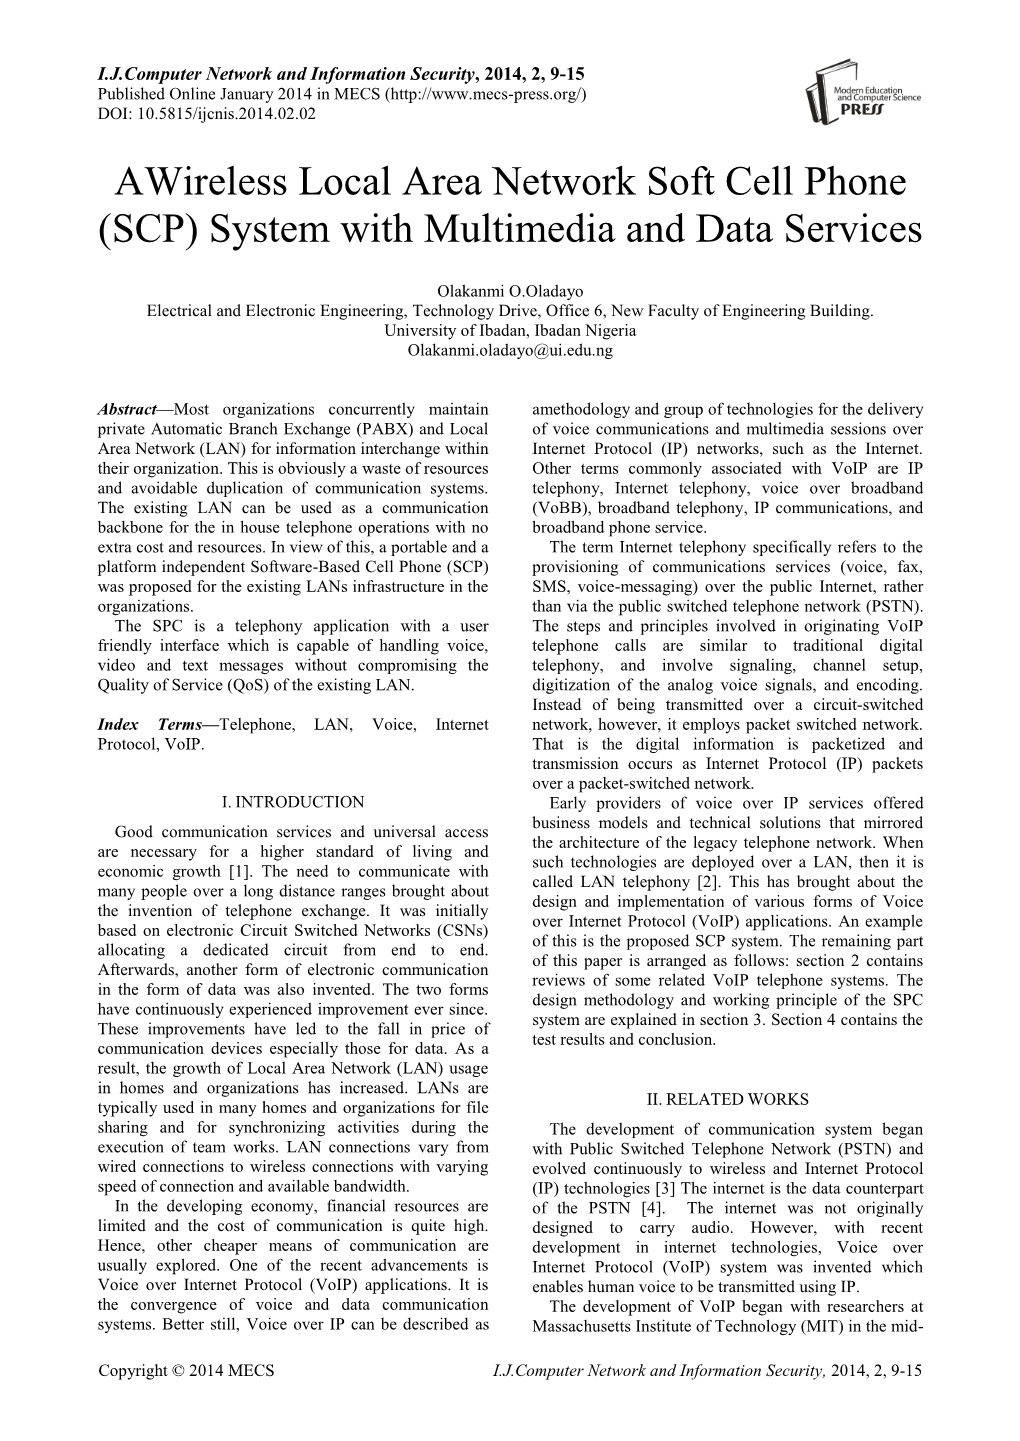 Awireless Local Area Network Soft Cell Phone (SCP) System with Multimedia and Data Services